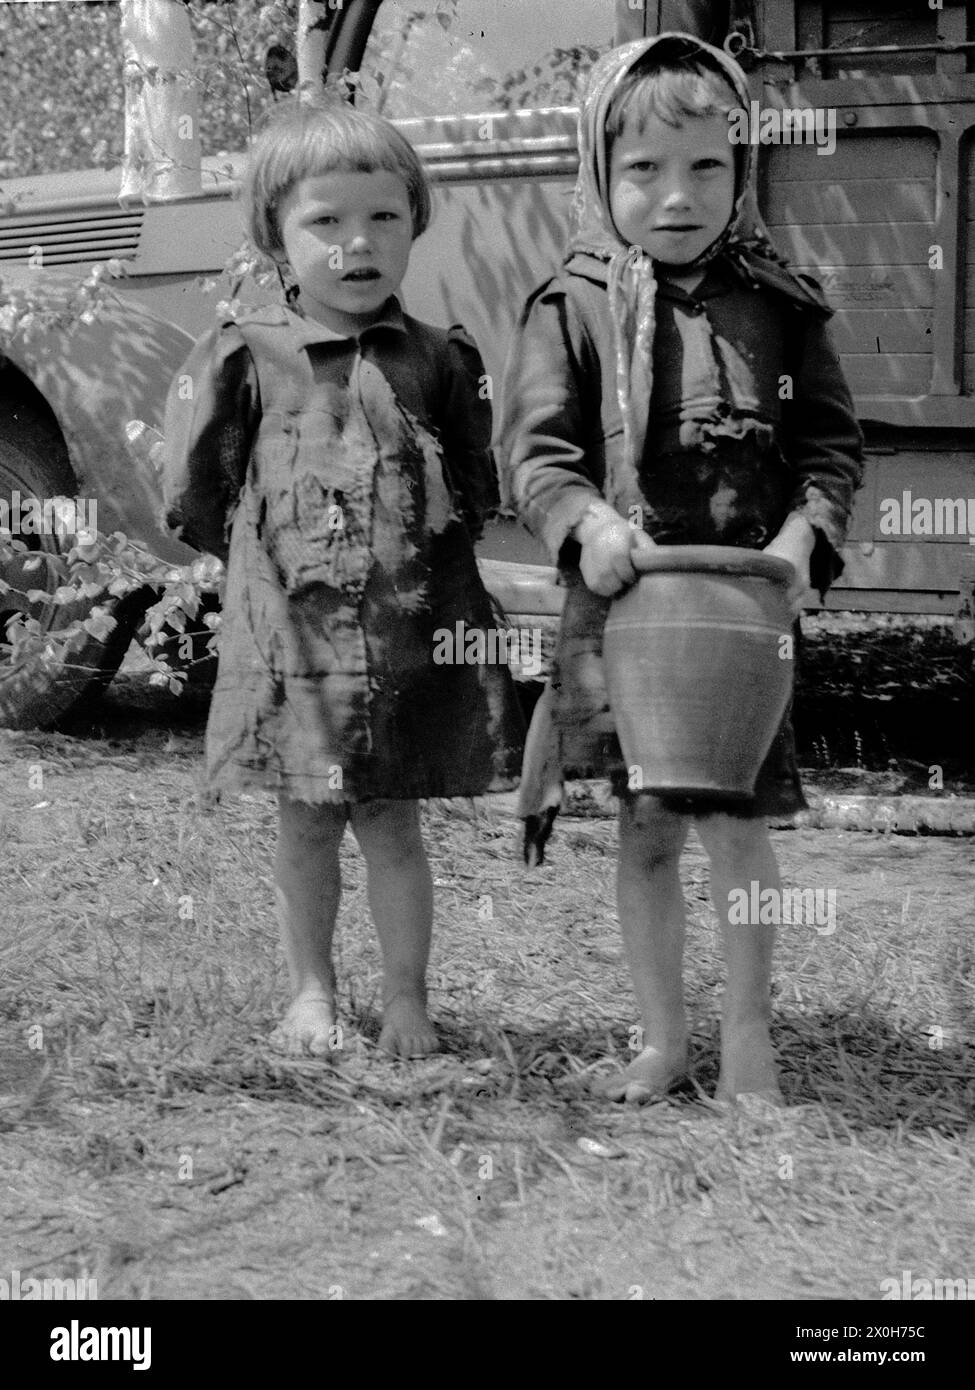 Two little girls in simple and patched clothes are standing in front of a Wehrmacht vehicle. The girl with the headscarf is carrying a clay jug. The picture was taken by a member of the Radfahrgrenadierregiment 2 / Radfahrsicherungsregiment 2, on the Eastern Front. [automated translation] Stock Photo